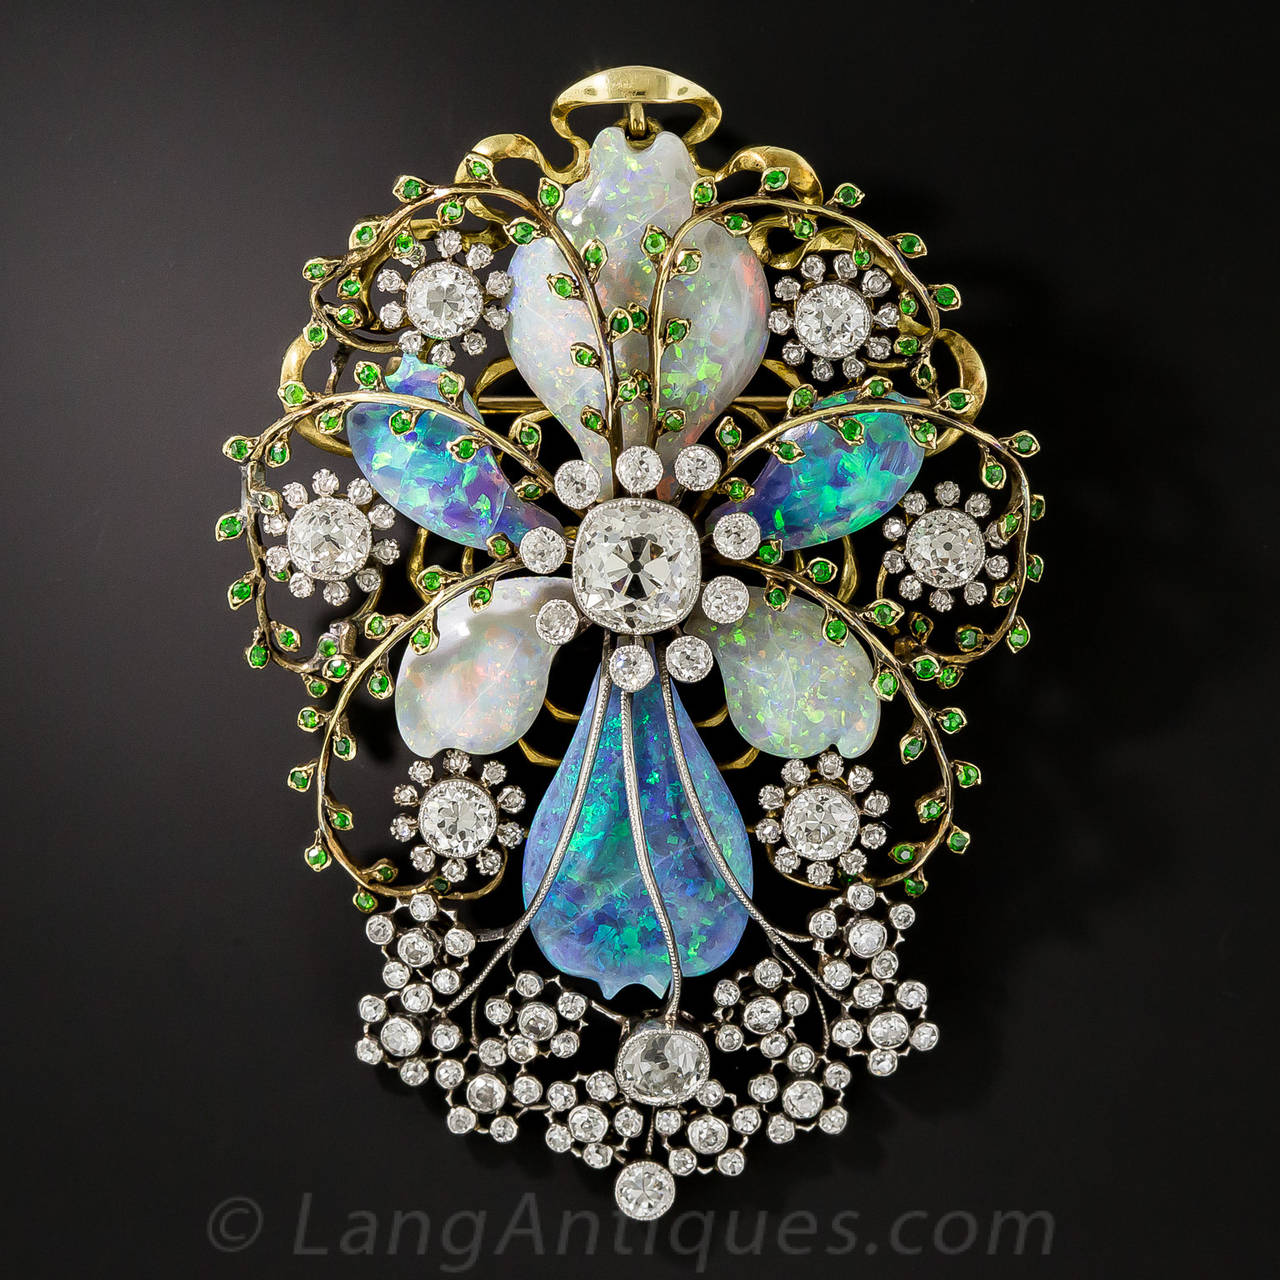 Amazing is the adjective that comes to mind when describing this masterpiece from the turn of the 20th century. Art Nouveau artistry is in full flower in this stunning jewel composed of black opals, white opals, diamonds and rare demantoid garnets.